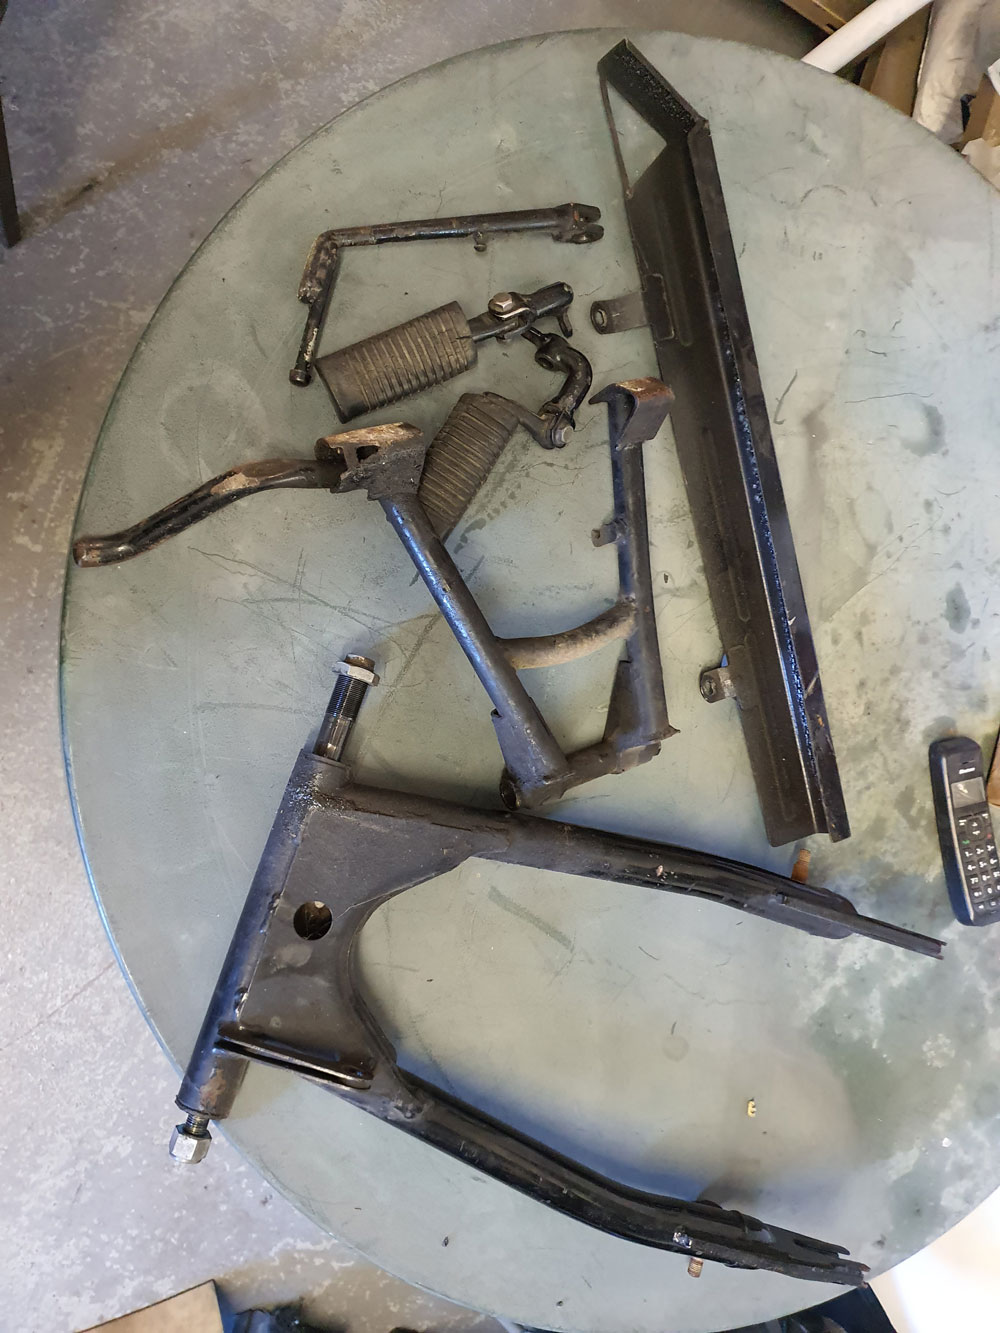 Benelli Sei 750 ancillary parts require blasting and painting